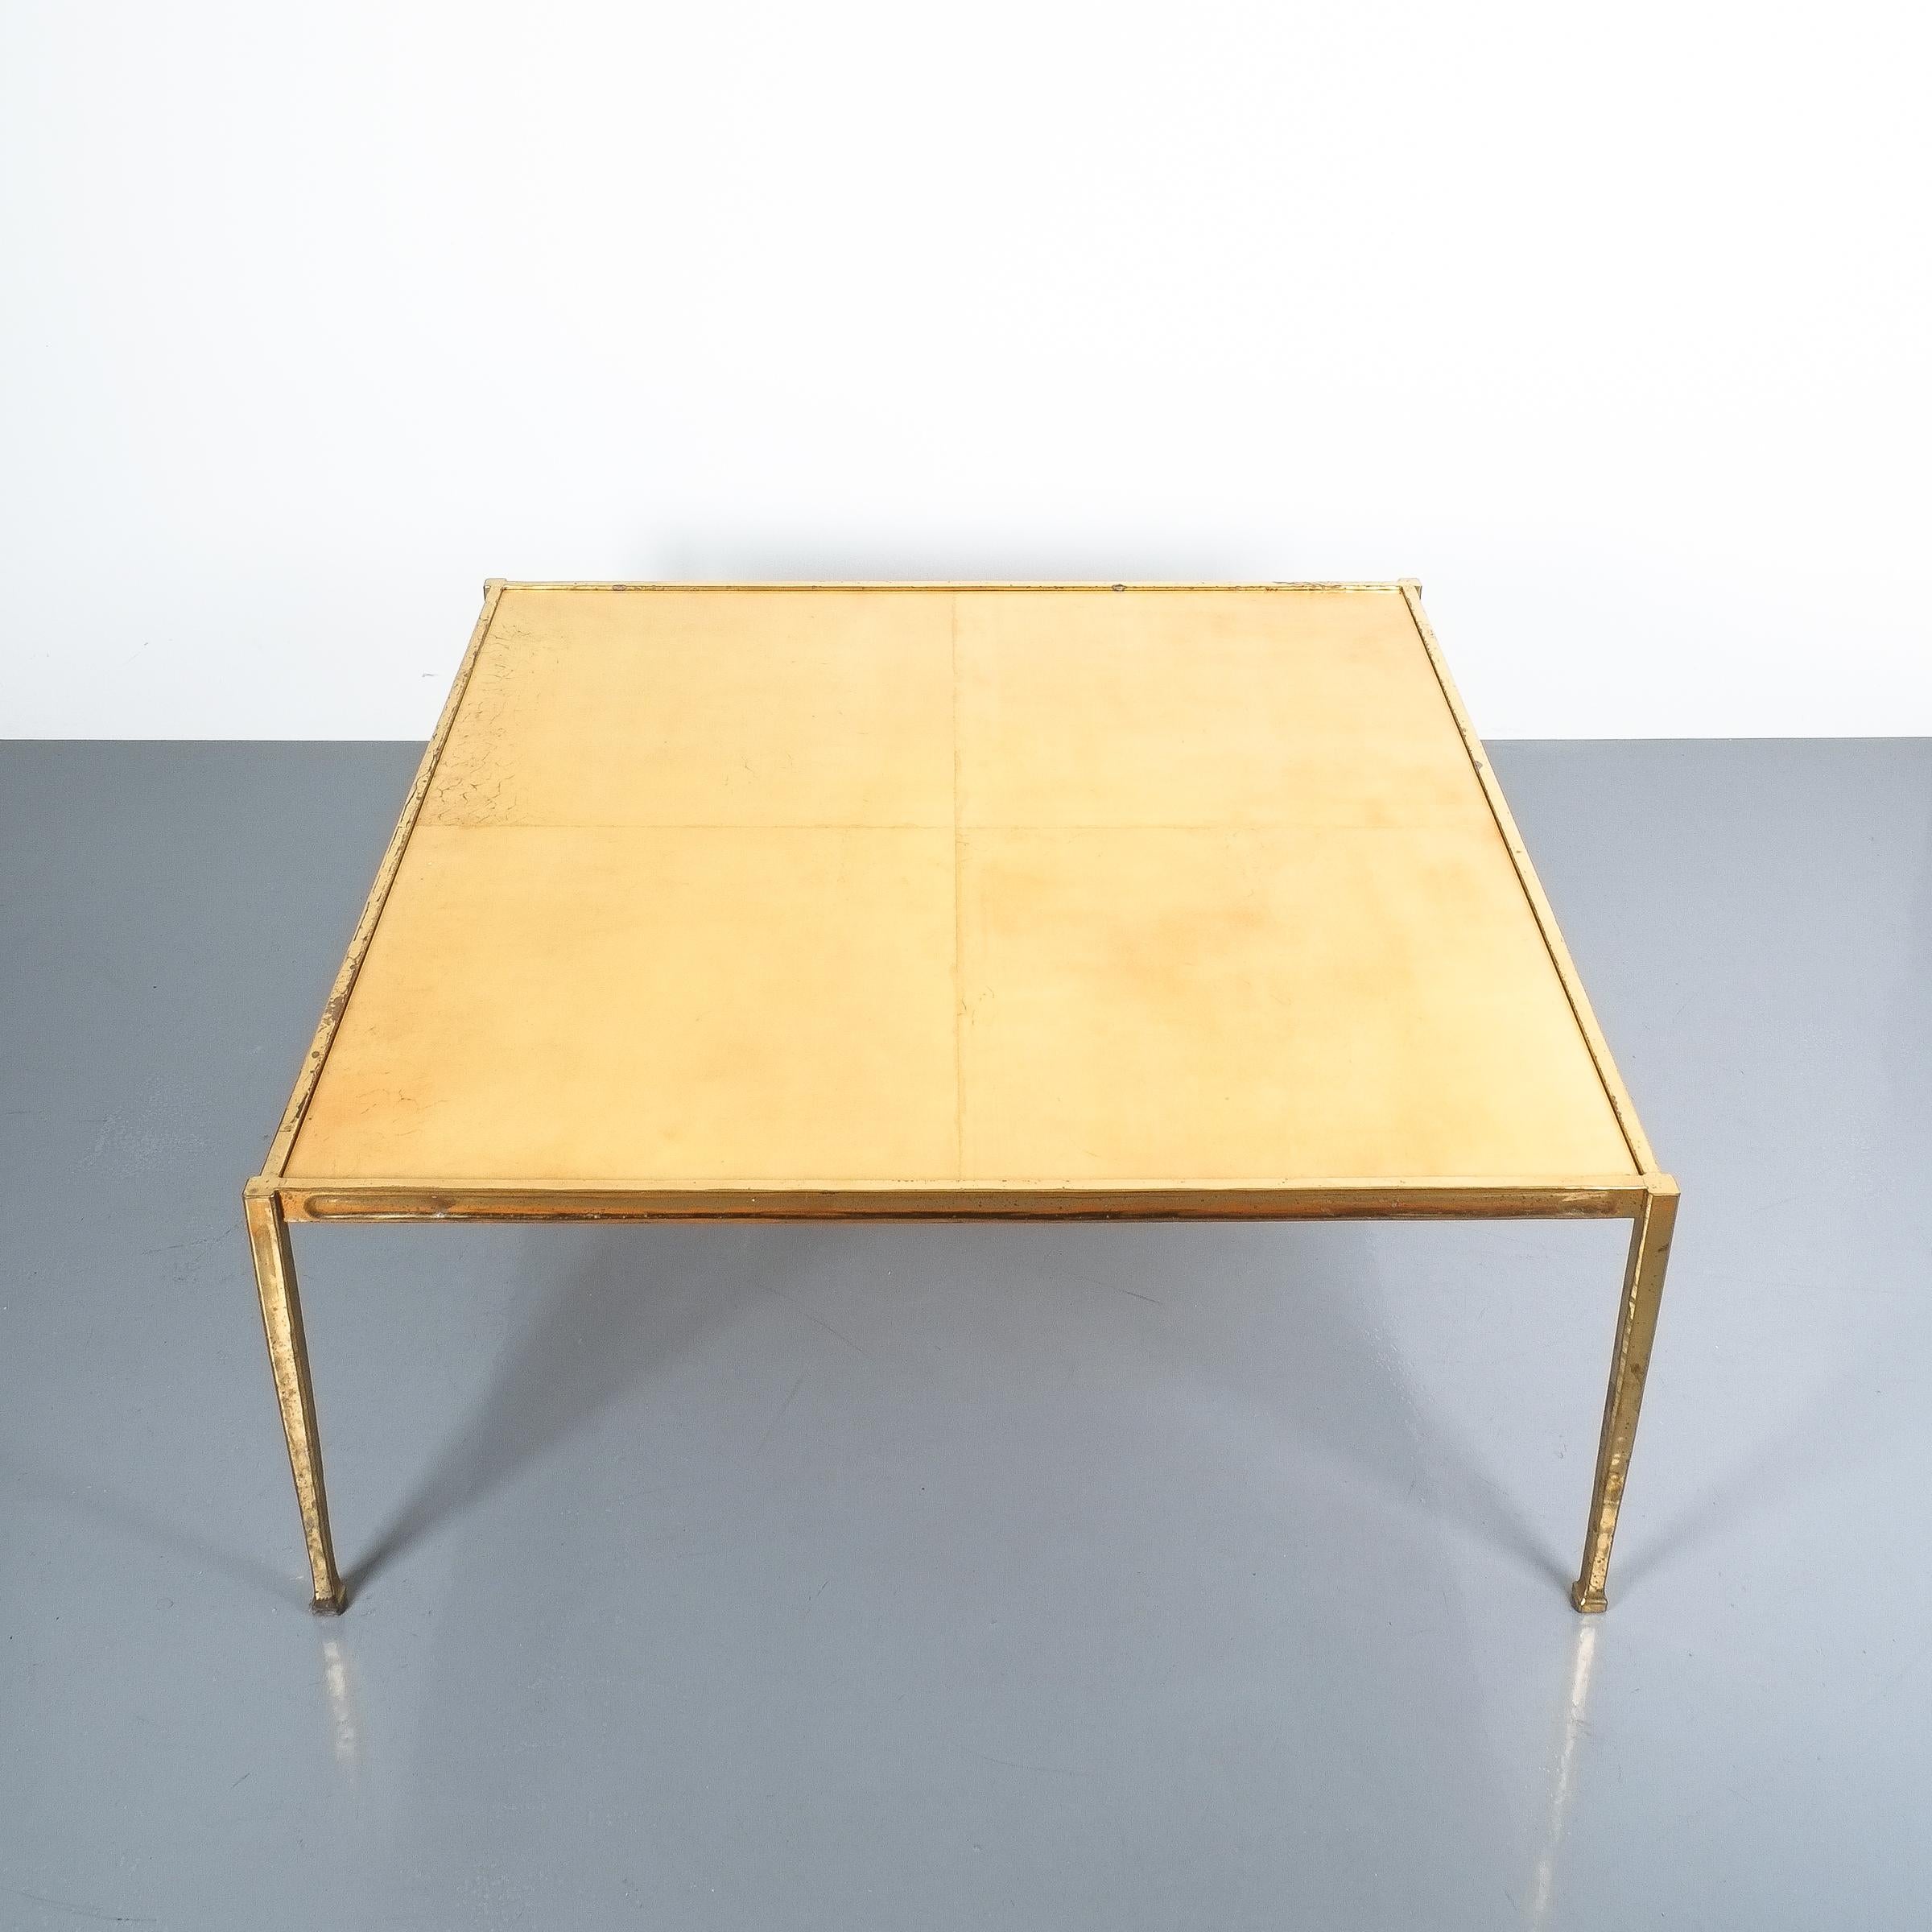 Hollywood Regency Square Solid Brass Parchment Coffee Table, France, 1965 For Sale